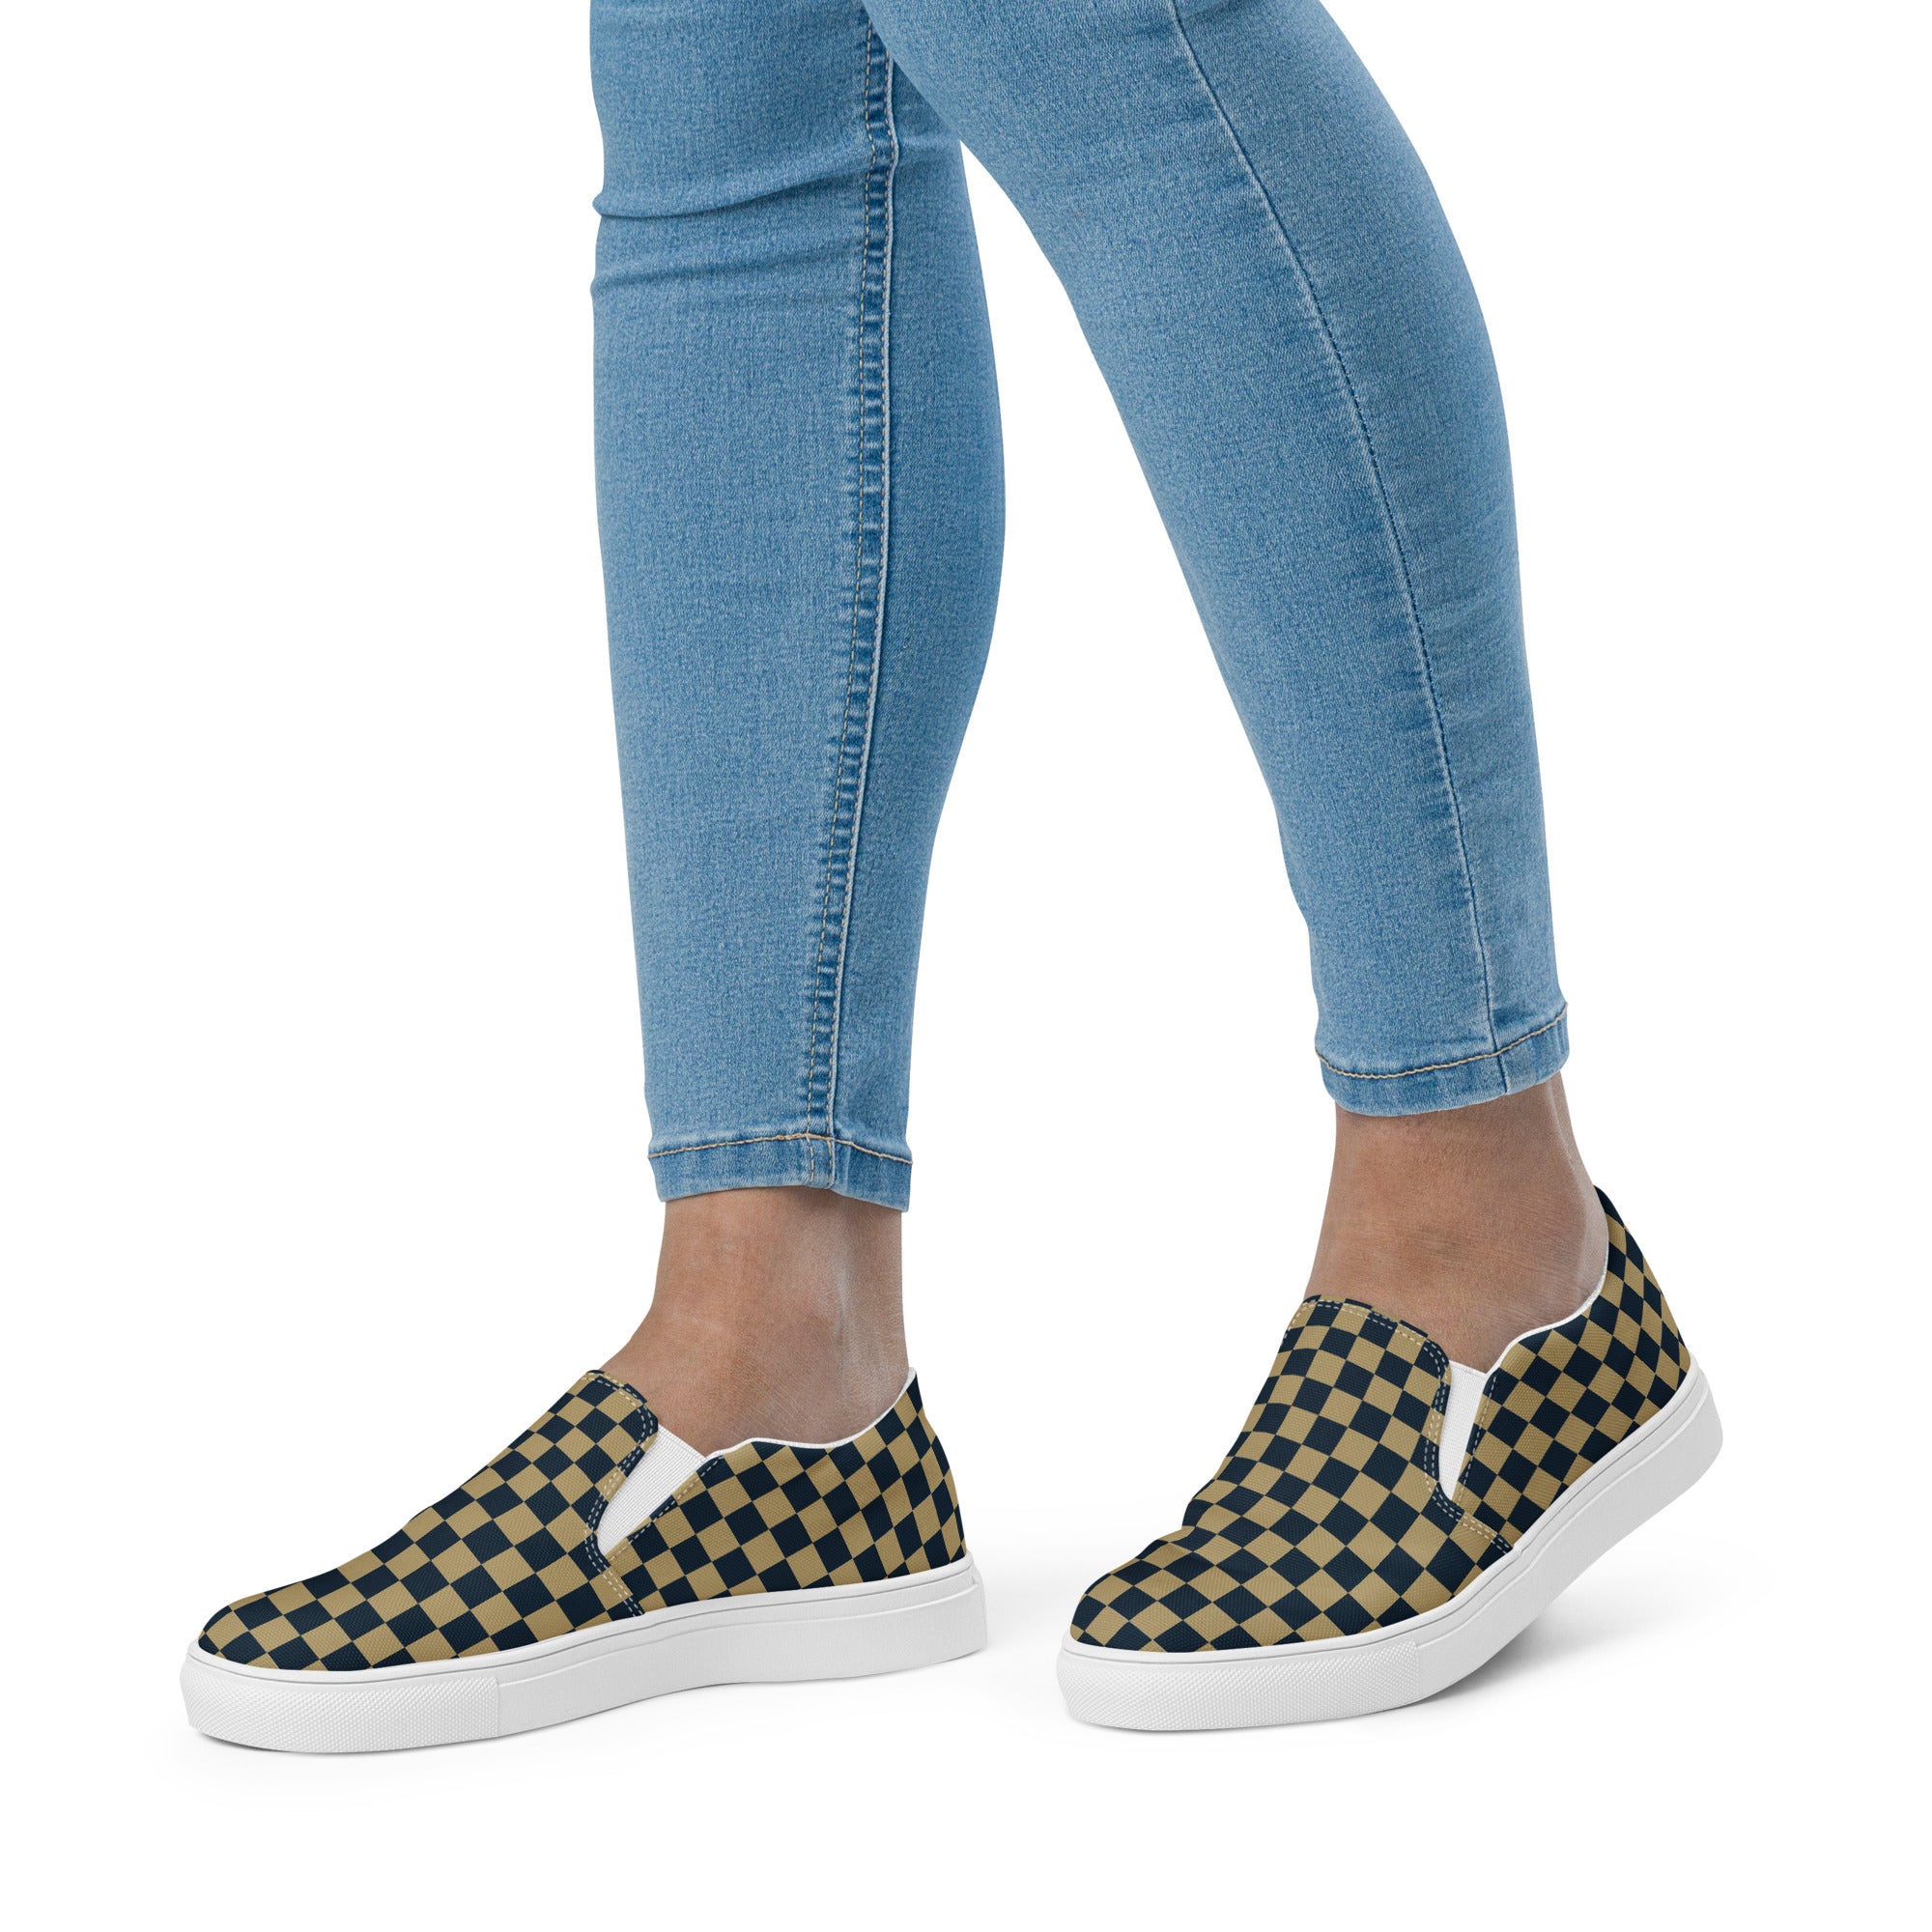 "The Doopers" Women’s Slip-on Canvas Shoes